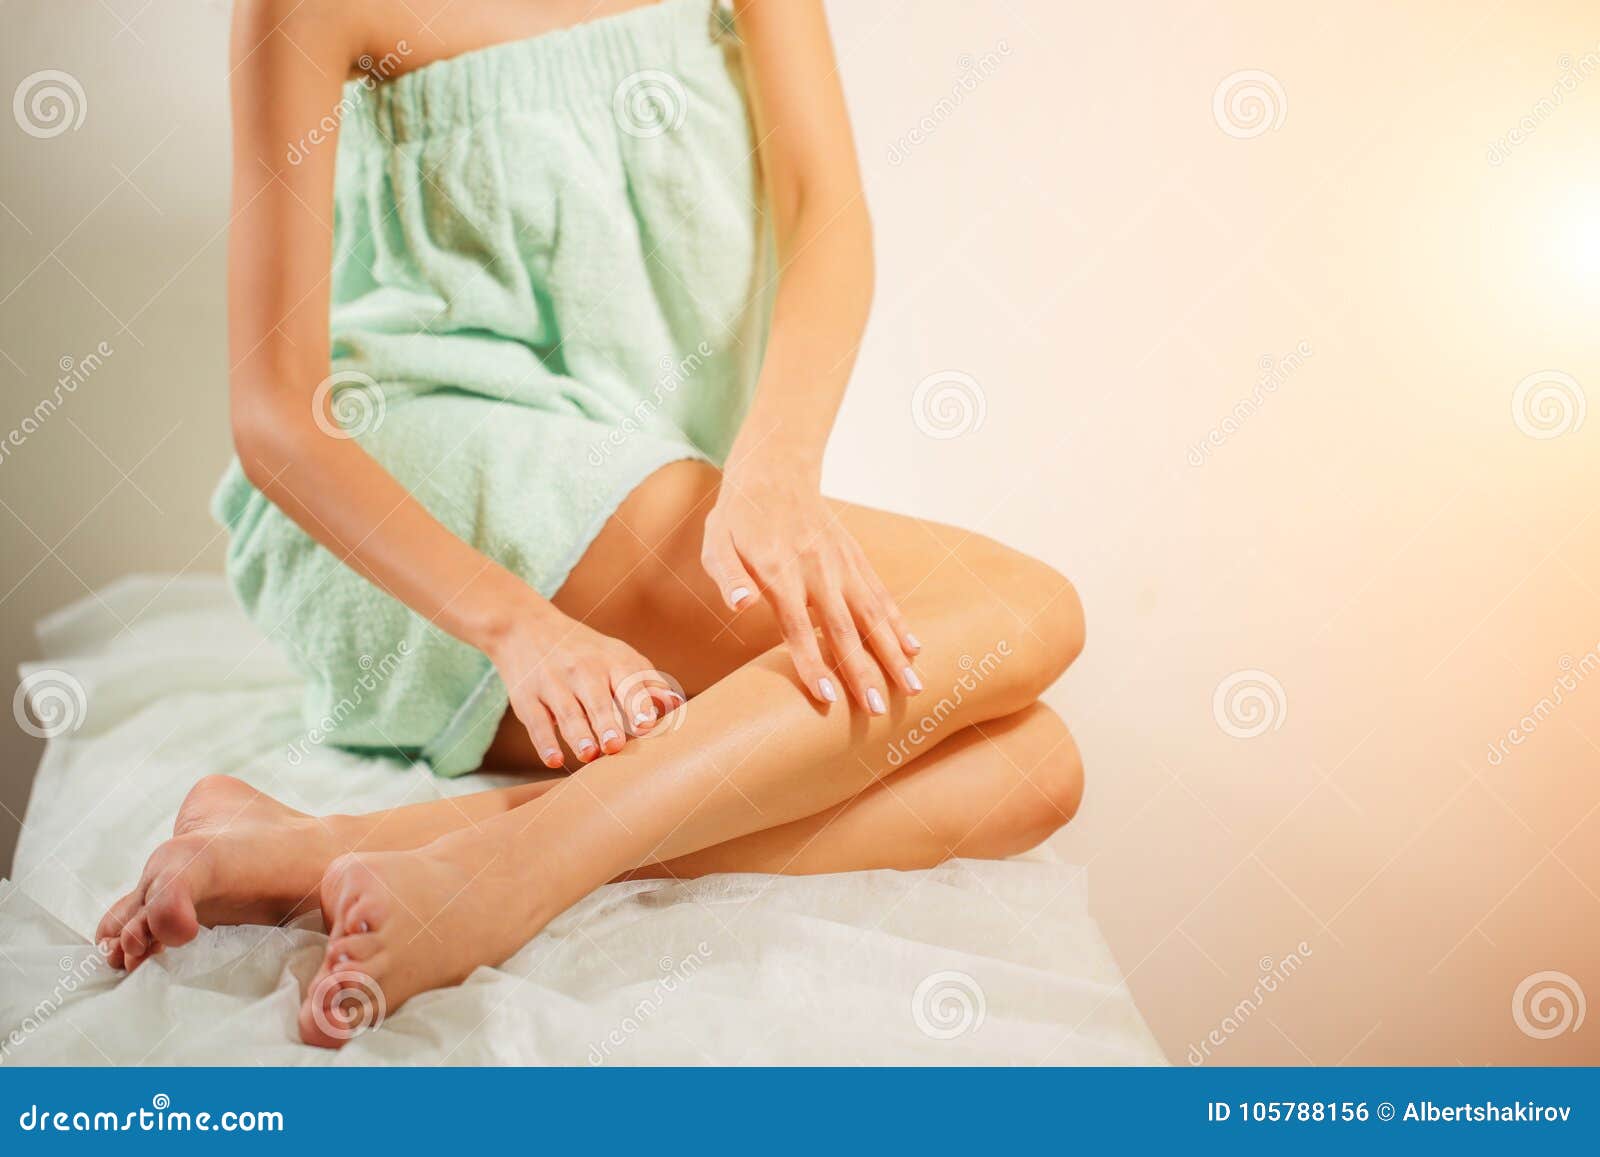 Body Care. Beautiful Woman with Long Legs, Healthy Soft Skin Stock Photo -  Image of legs, girl: 74382478